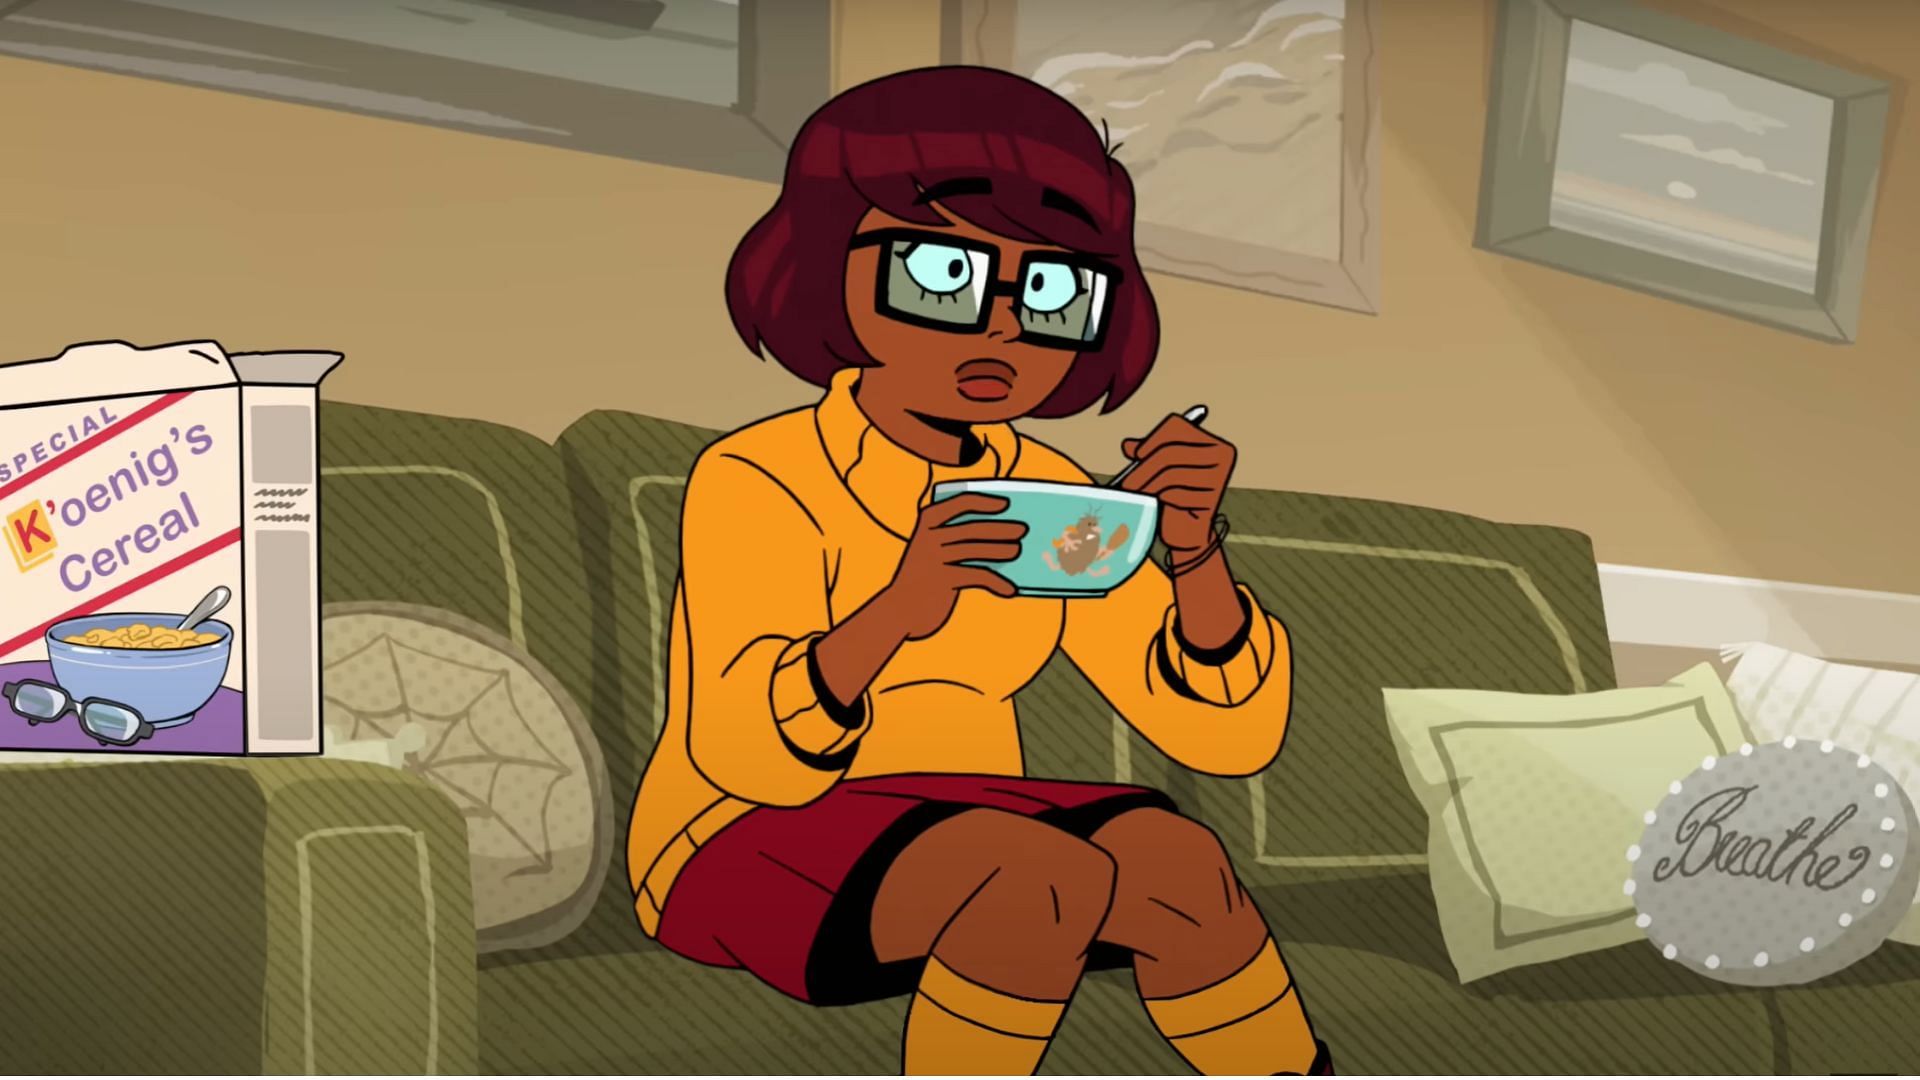 Velma season 2 must rethink its approach to the show (Image via HBO Max)